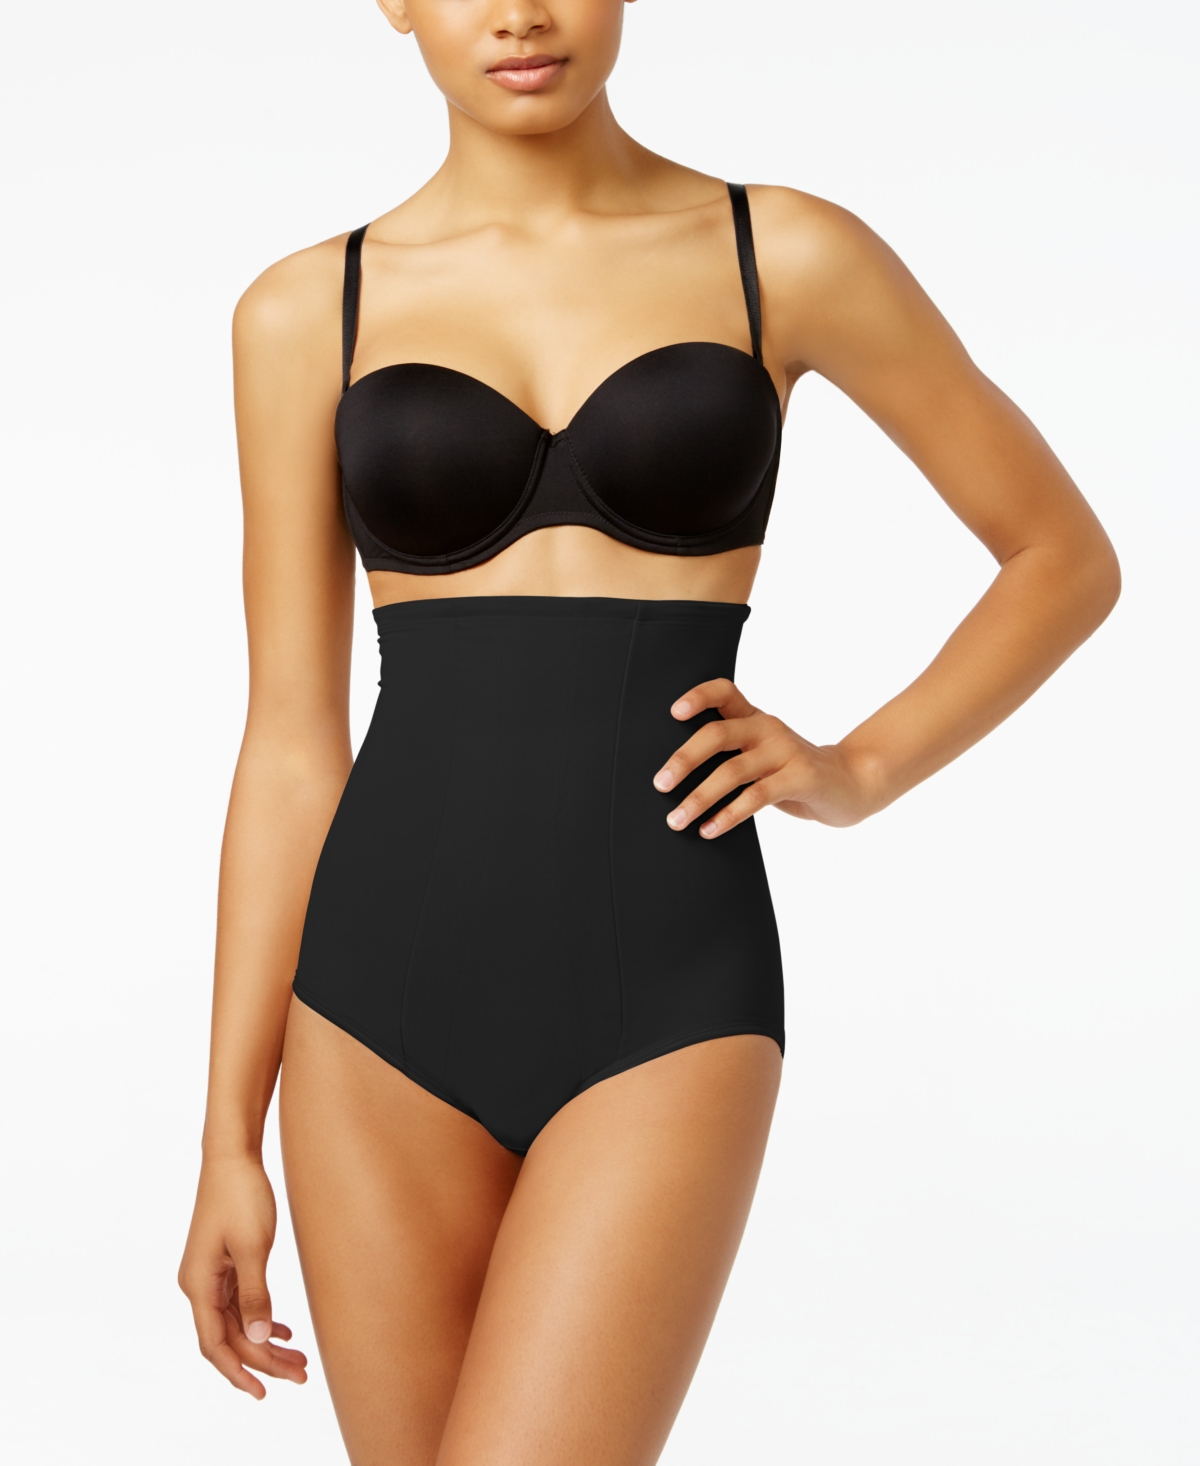 UPC 080225106565 product image for Miraclesuit Women's Extra Firm Tummy-Control High Waist Brief 2705 | upcitemdb.com